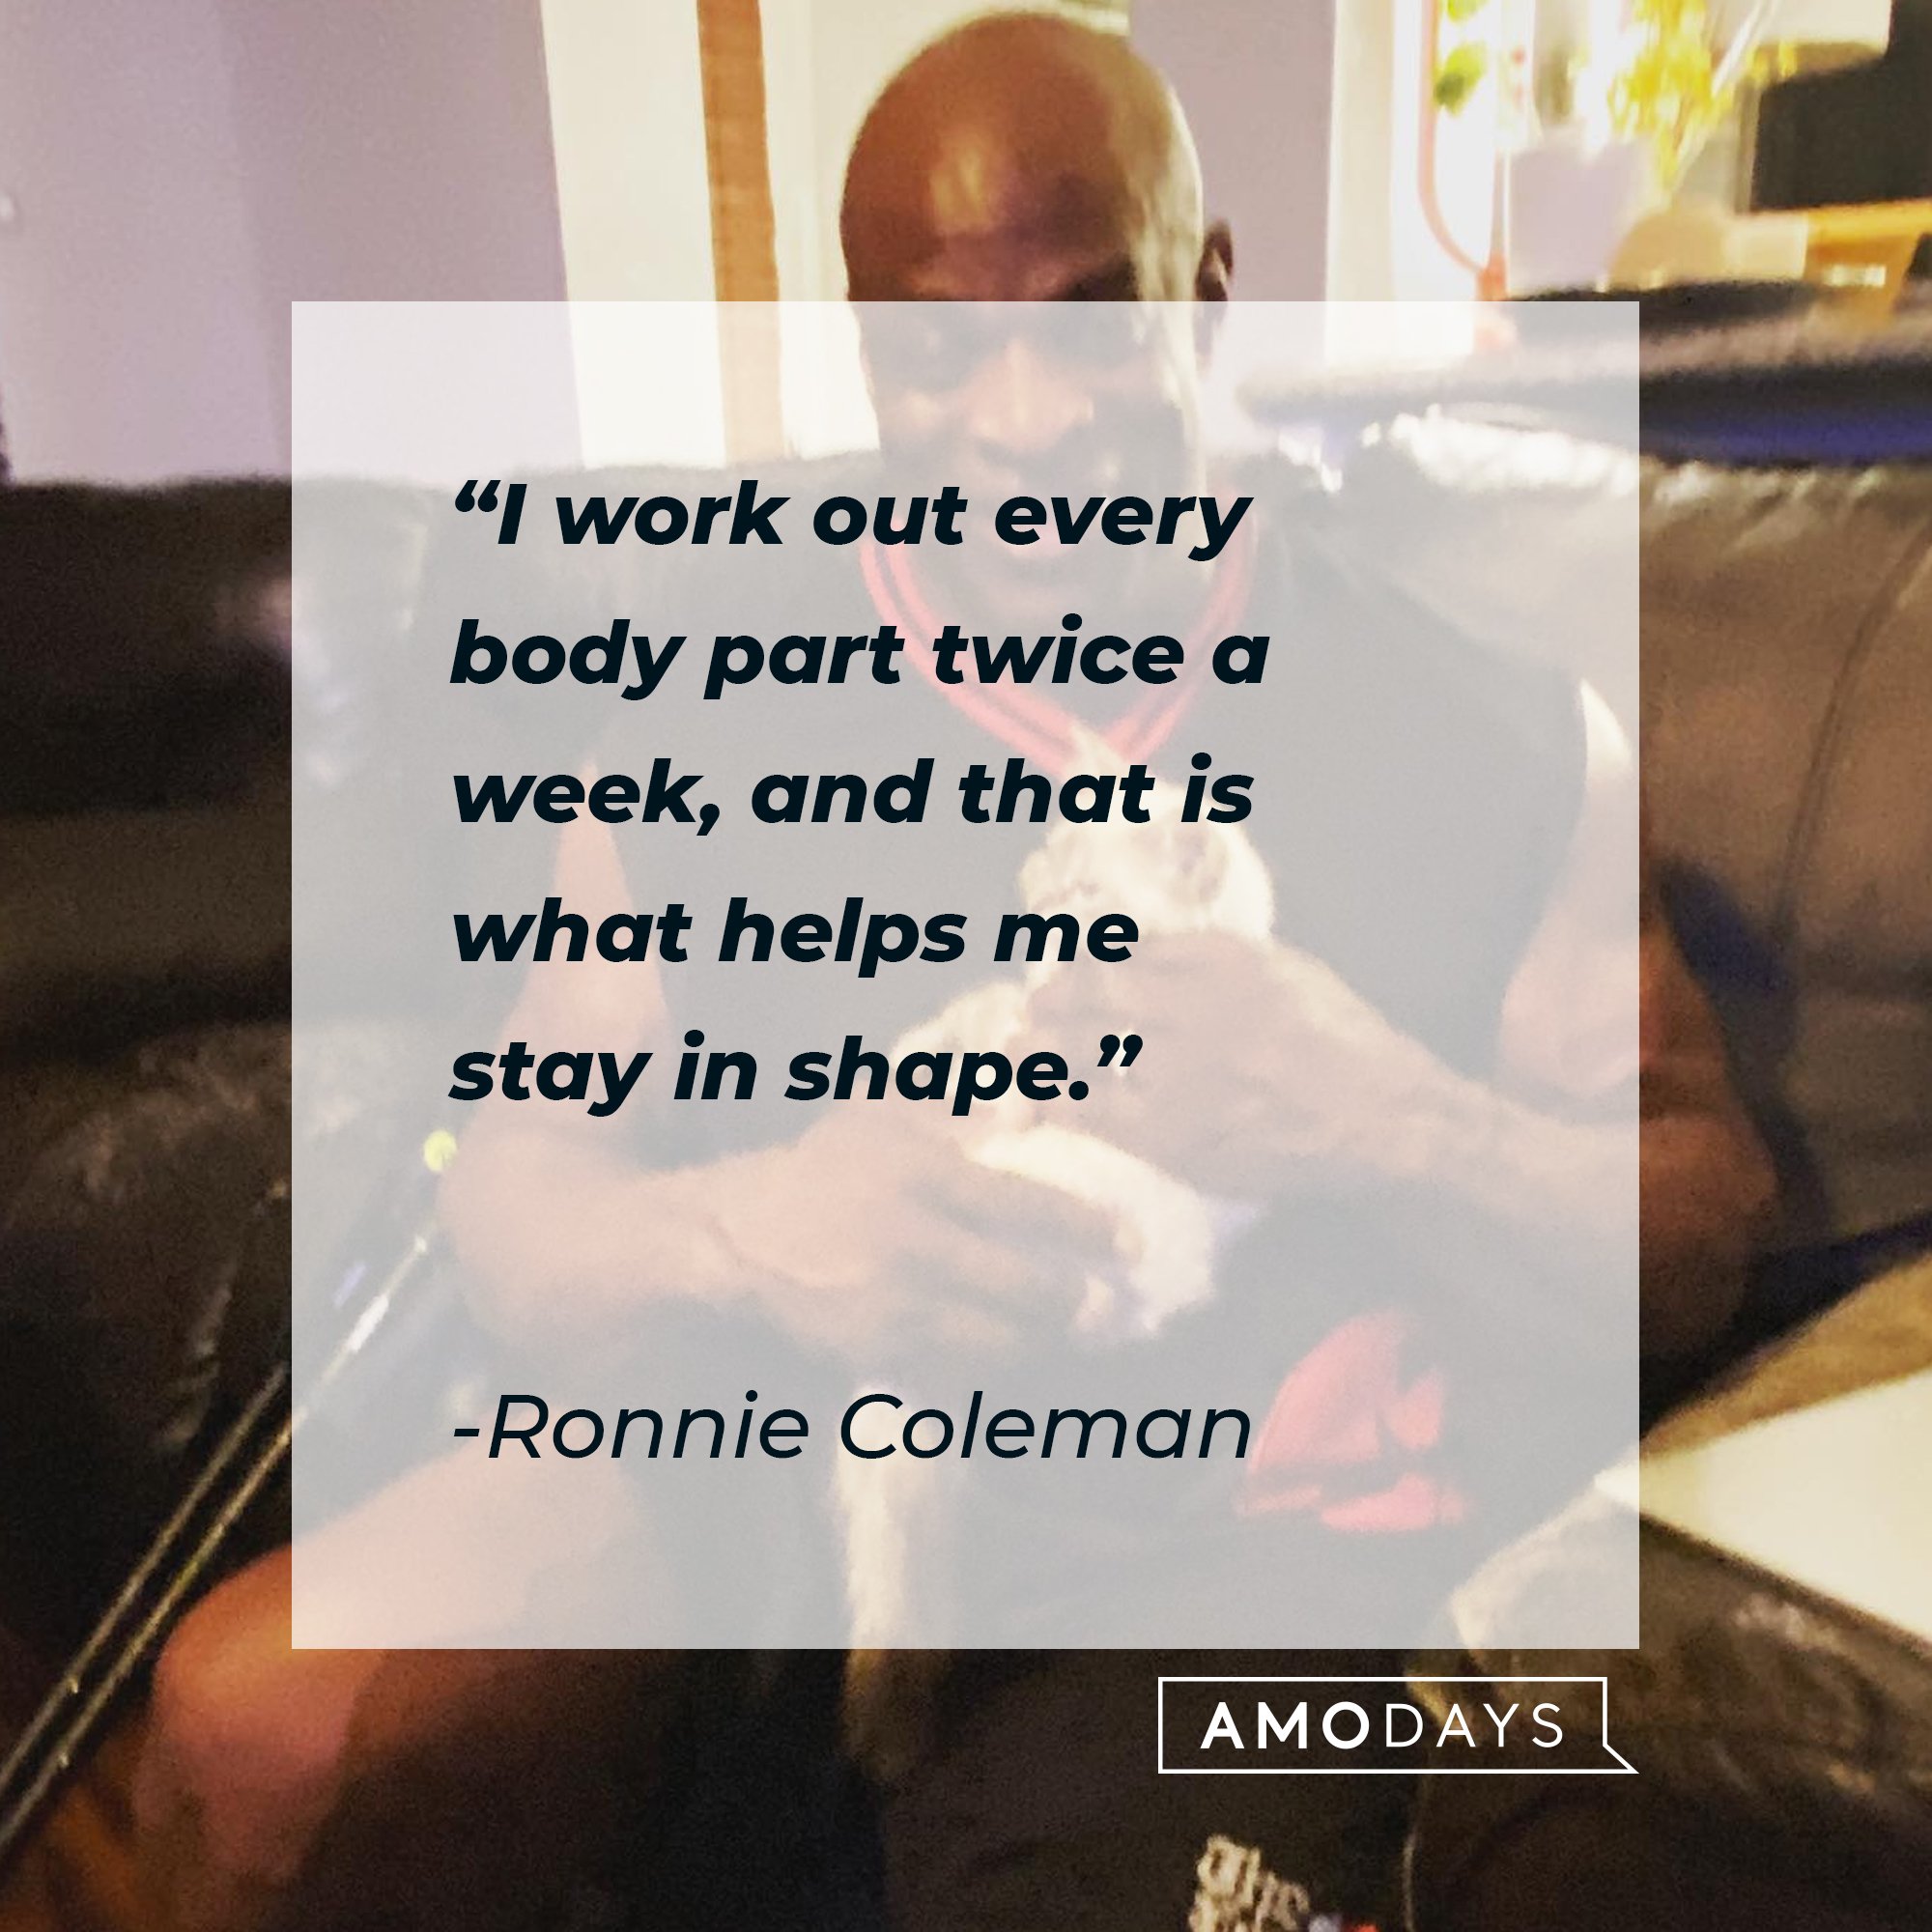   Ronnie Coleman’s quote: “I work out every body part twice a week, and that is what helps me stay in shape.” | Image: AmoDays